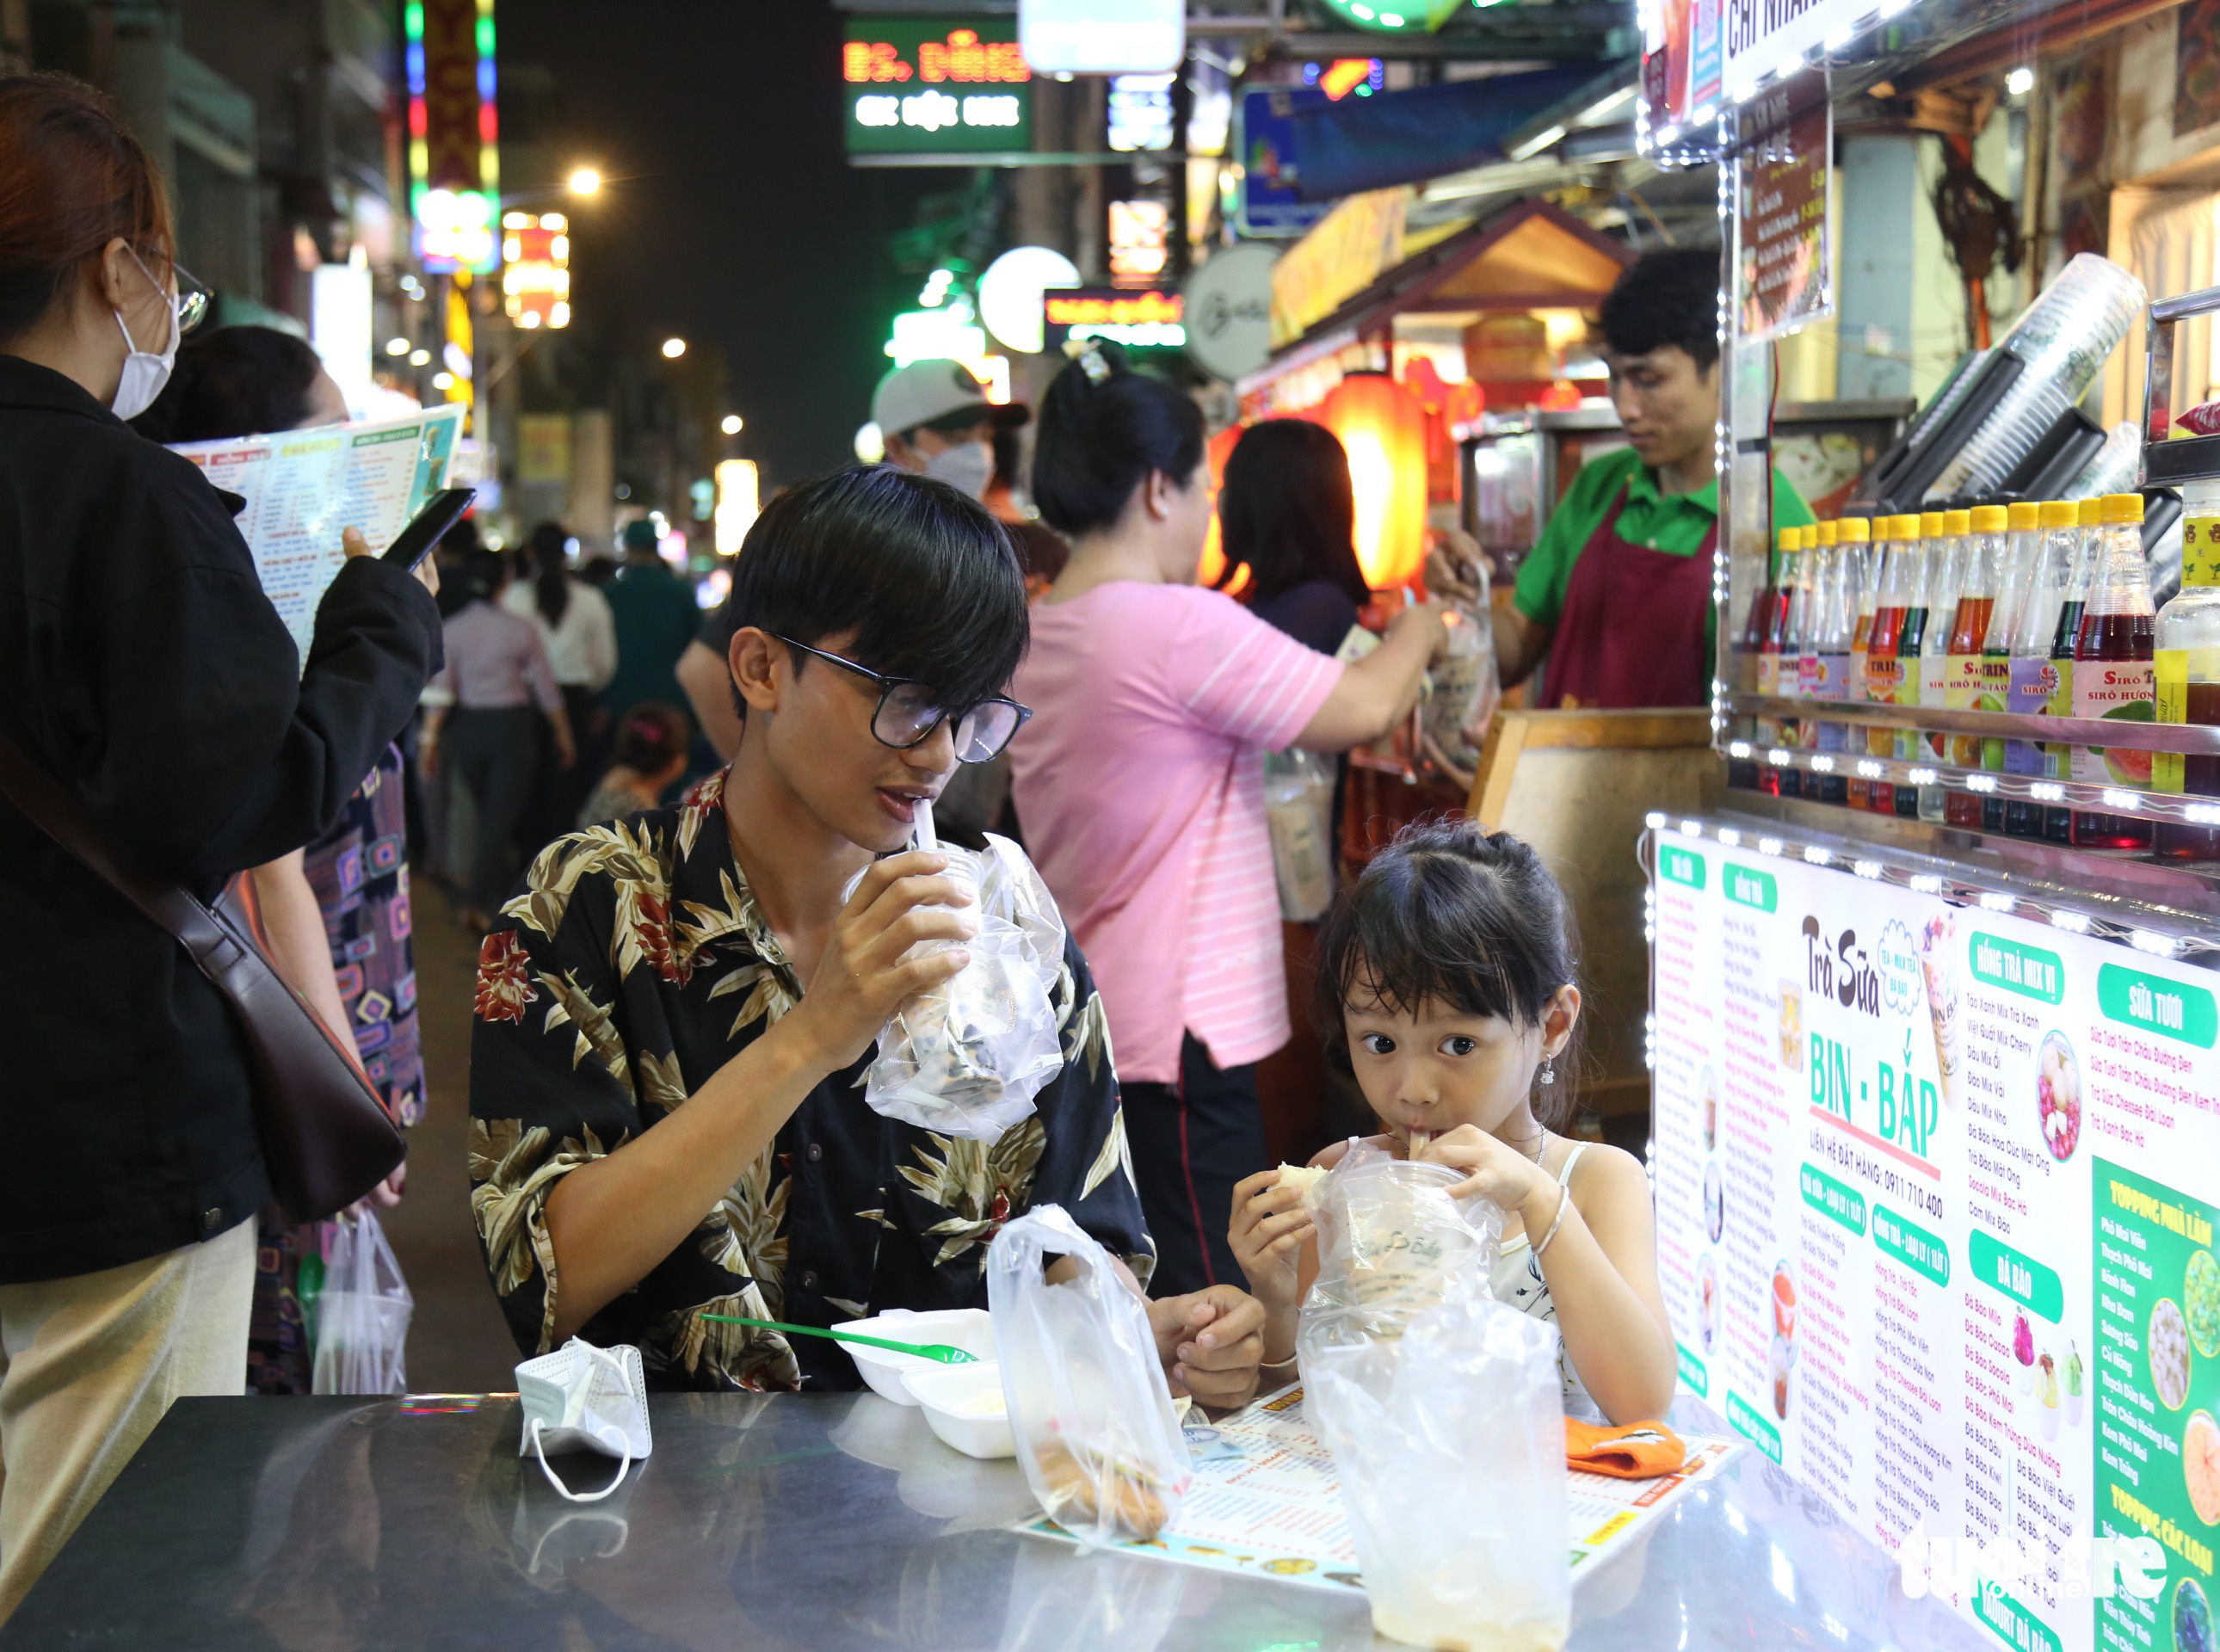 Thuan Khanh (L) and Thuan An enjoy beverages at Nguyen Thuong Hien Food Street in District 3, Ho Chi Minh City, December 21, 2022. Photo: Phuong Quyen / Tuoi Tre